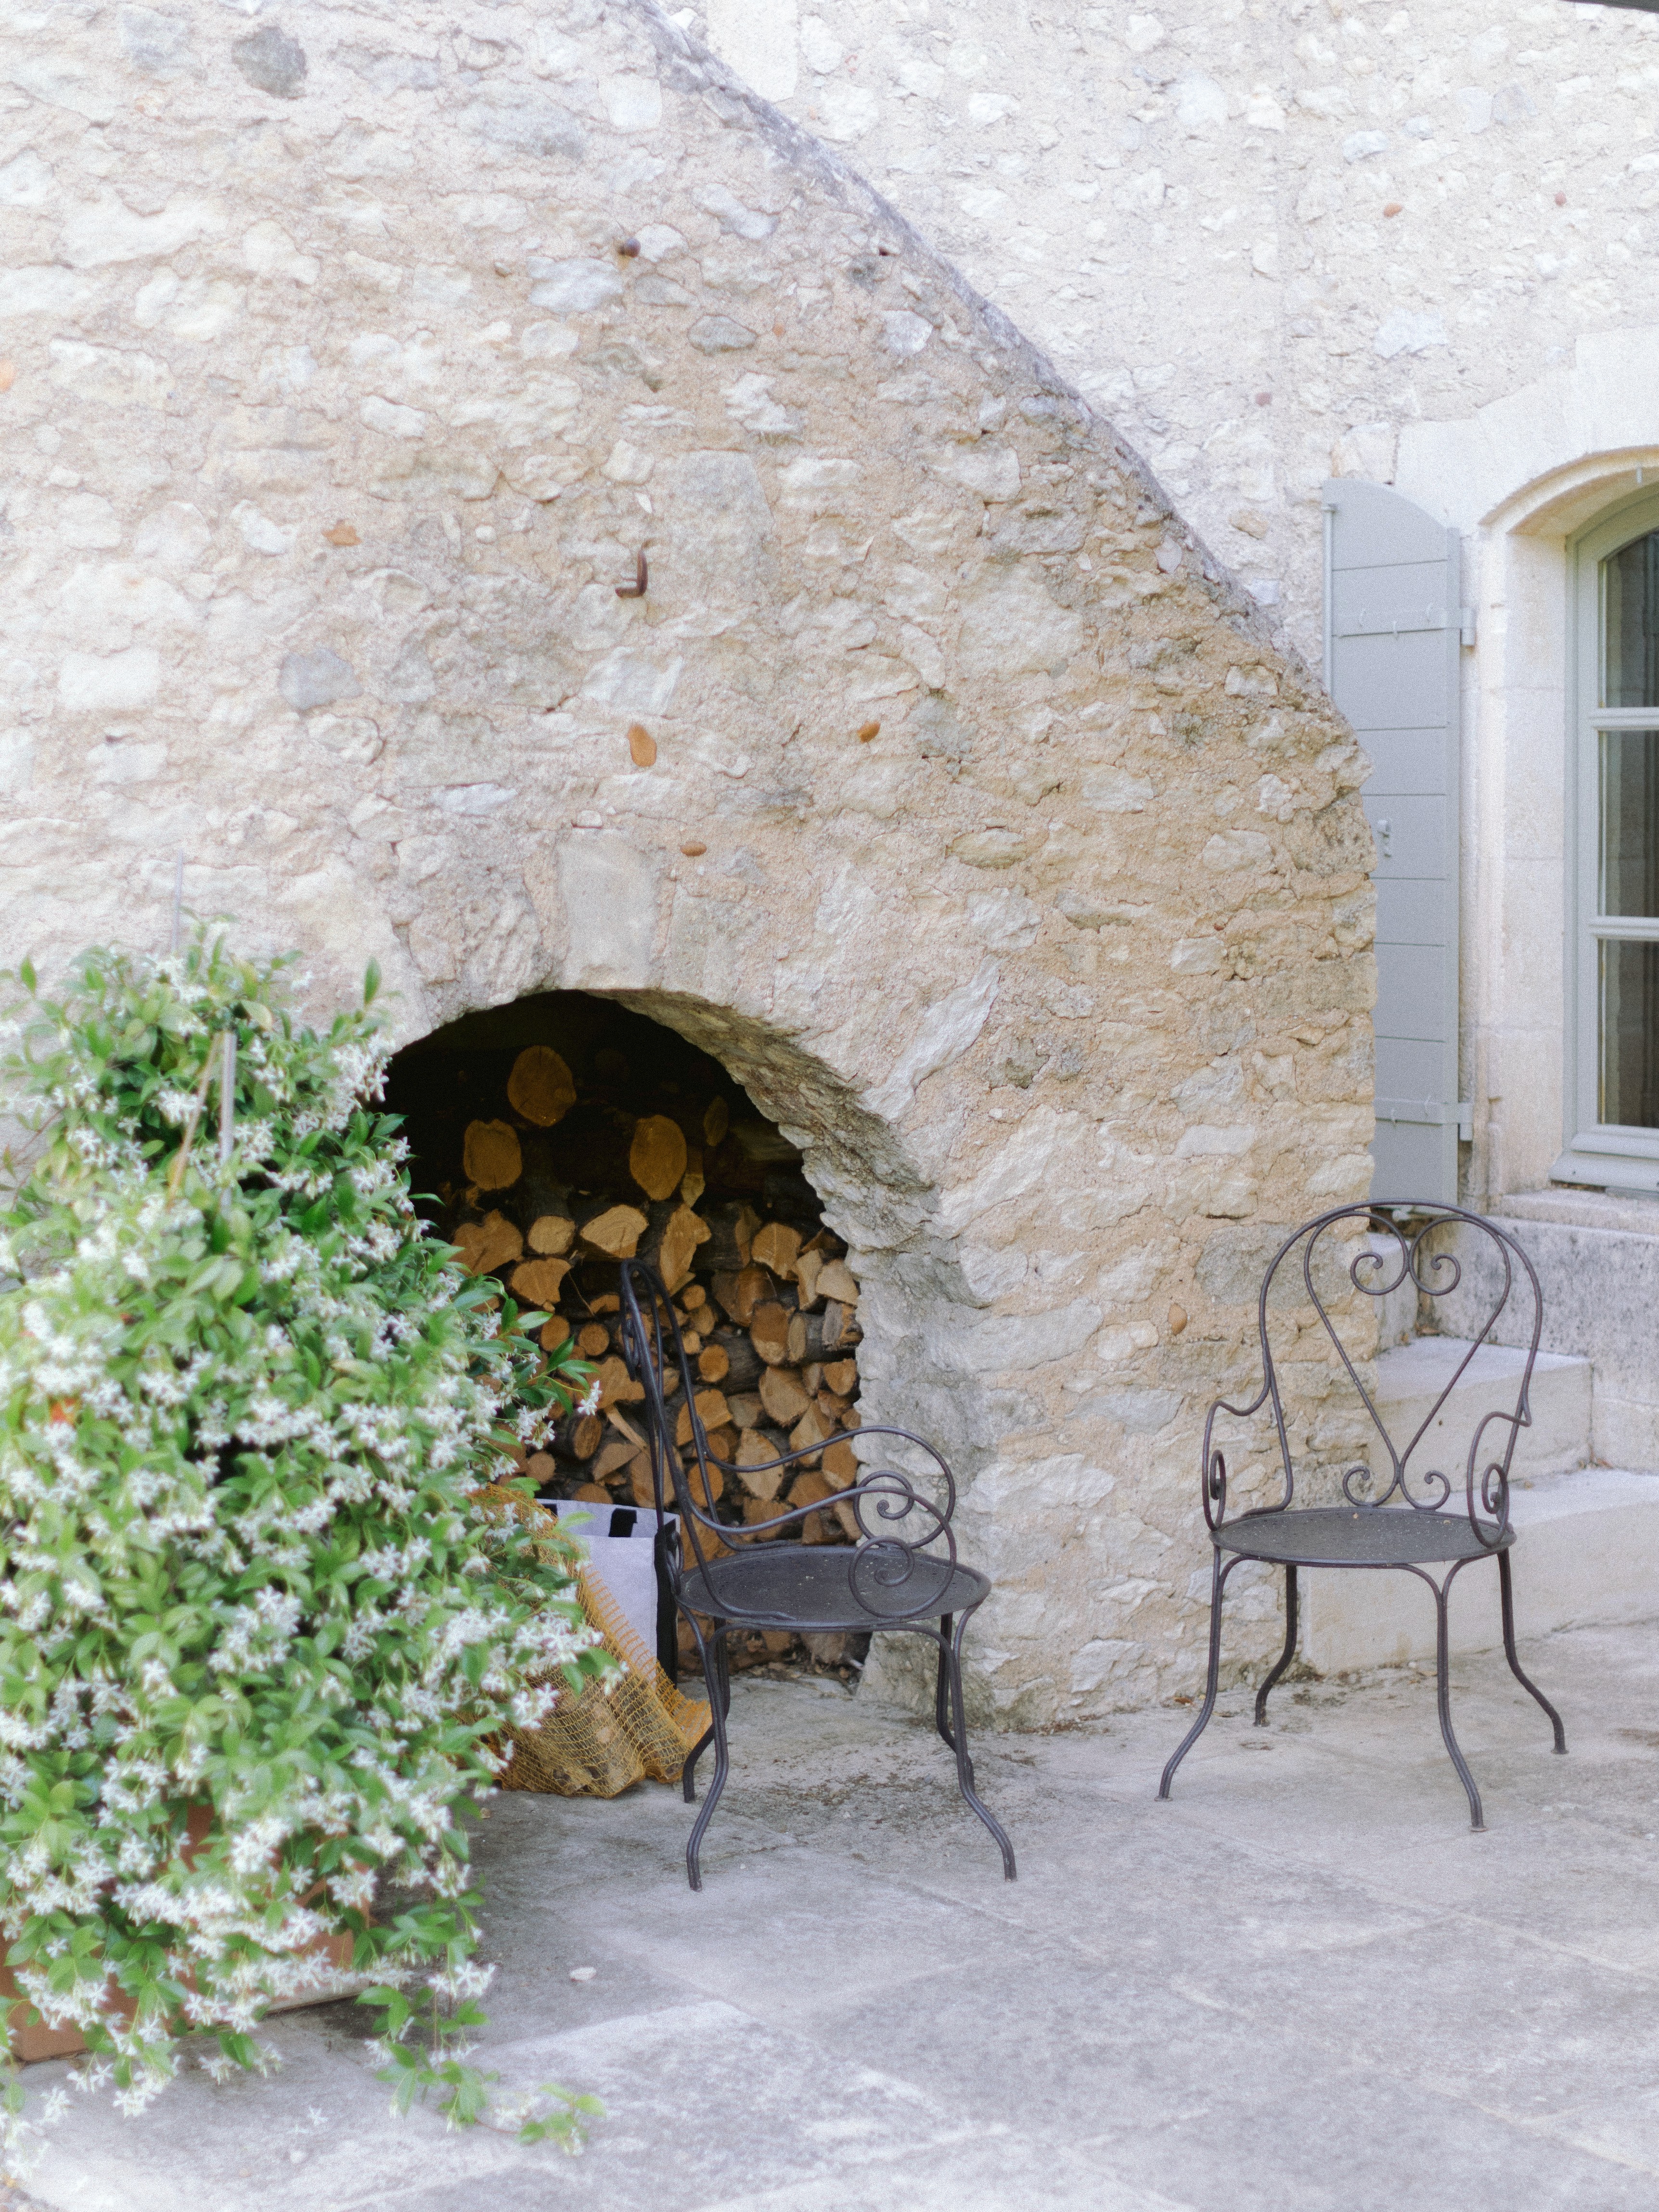 A quaint corner with two metal chairs beside a stone wall featuring an arched alcove filled with firewood, next to blooming white flowers.